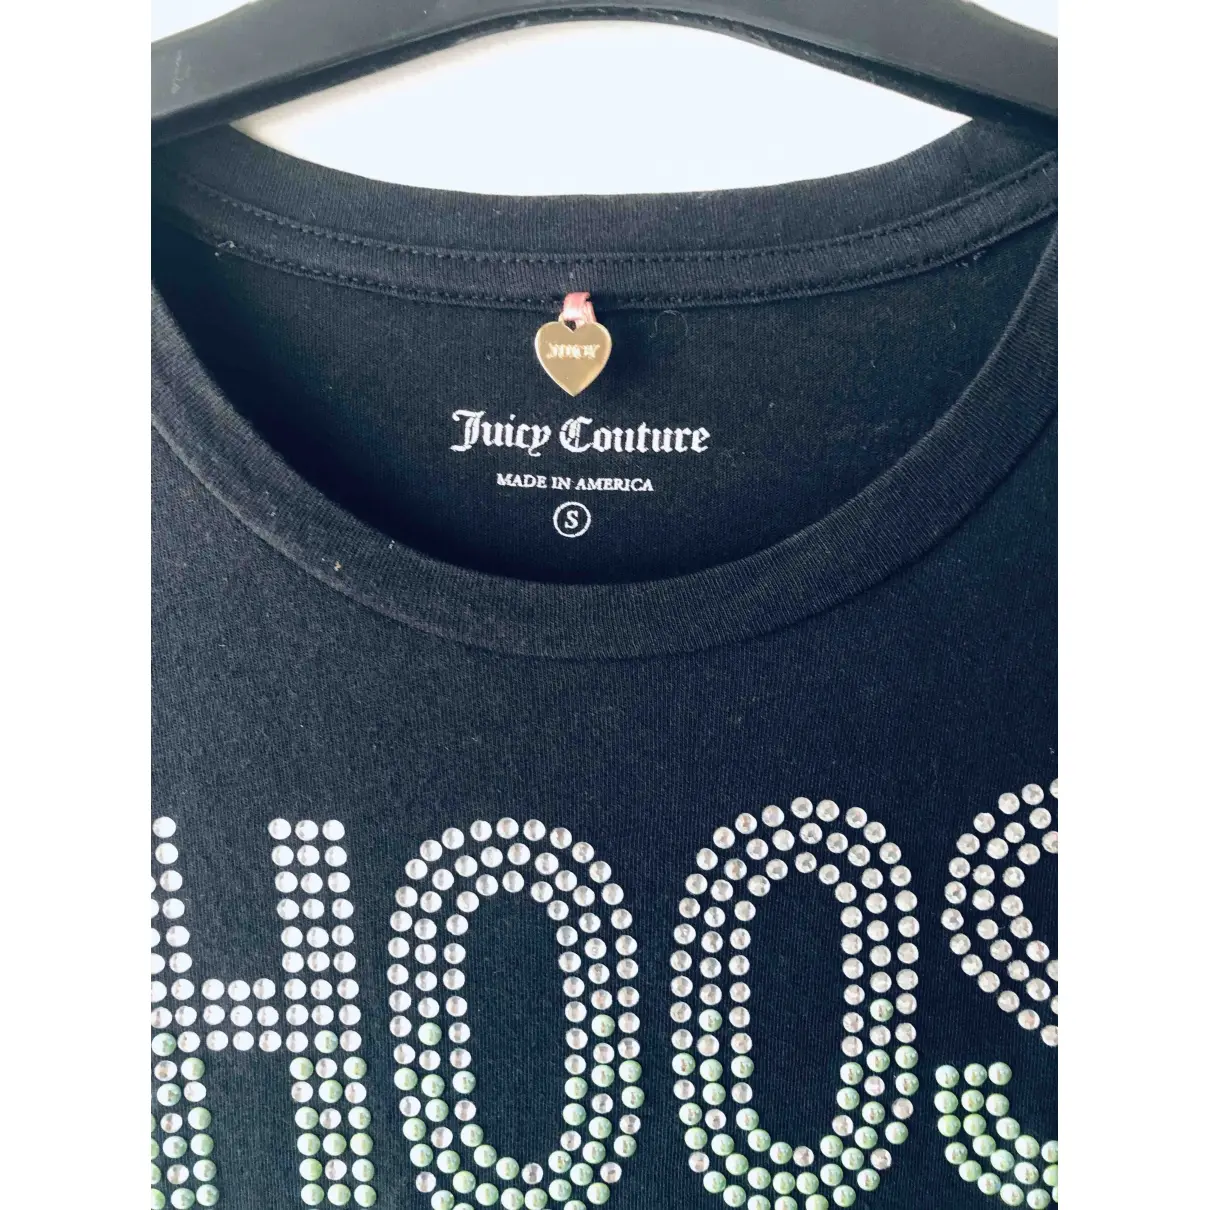 Juicy Couture T-shirt for sale